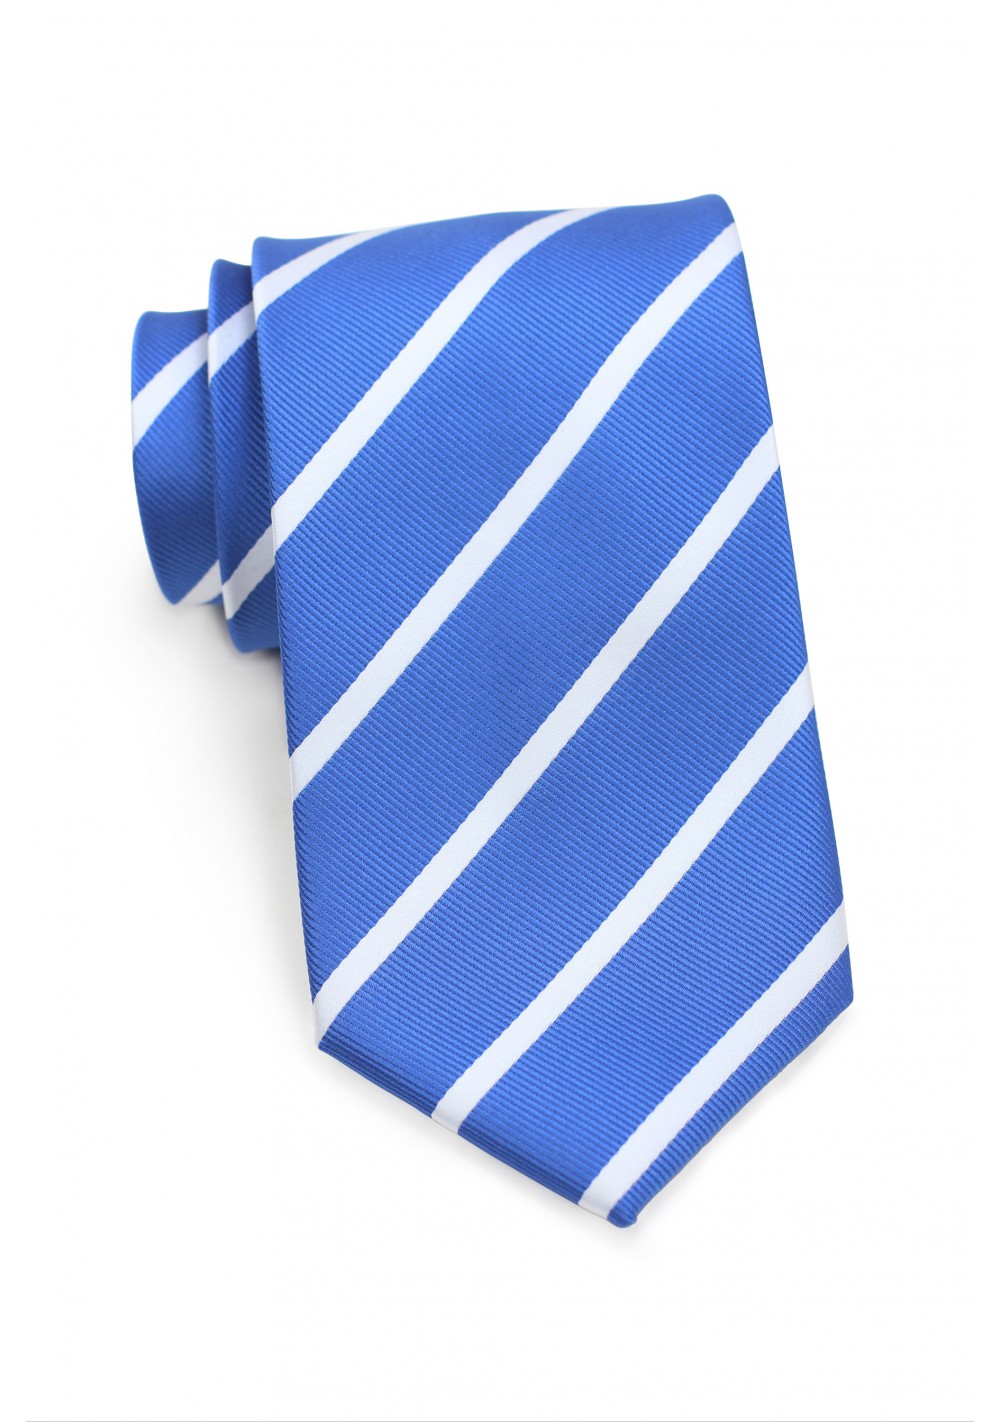 Riviera Blue and Silver Striped Tie | Bows-N-Ties.com